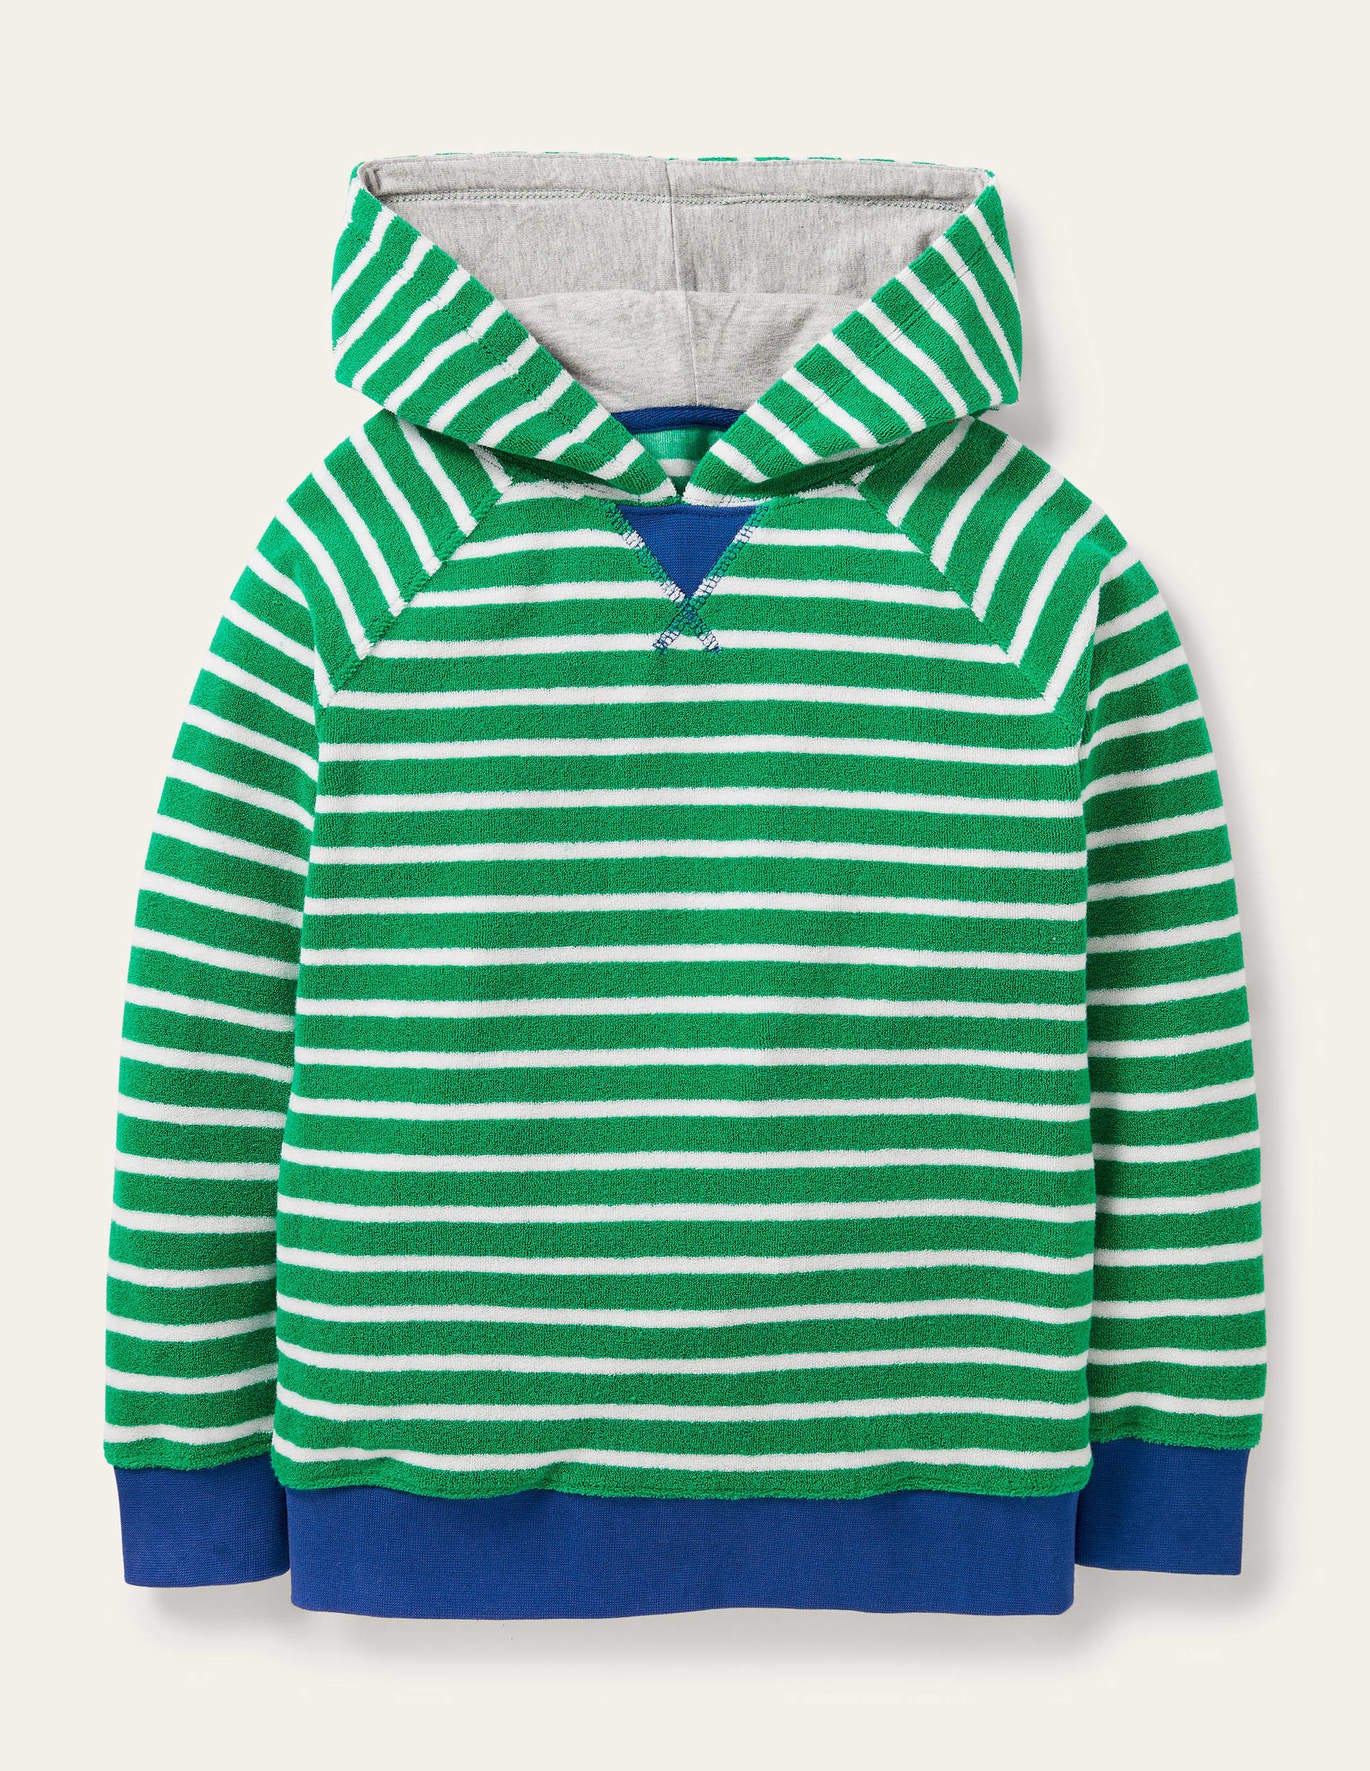 Boden Towelling Pull on Hoodie - Green Pepper/Ivory Stripe